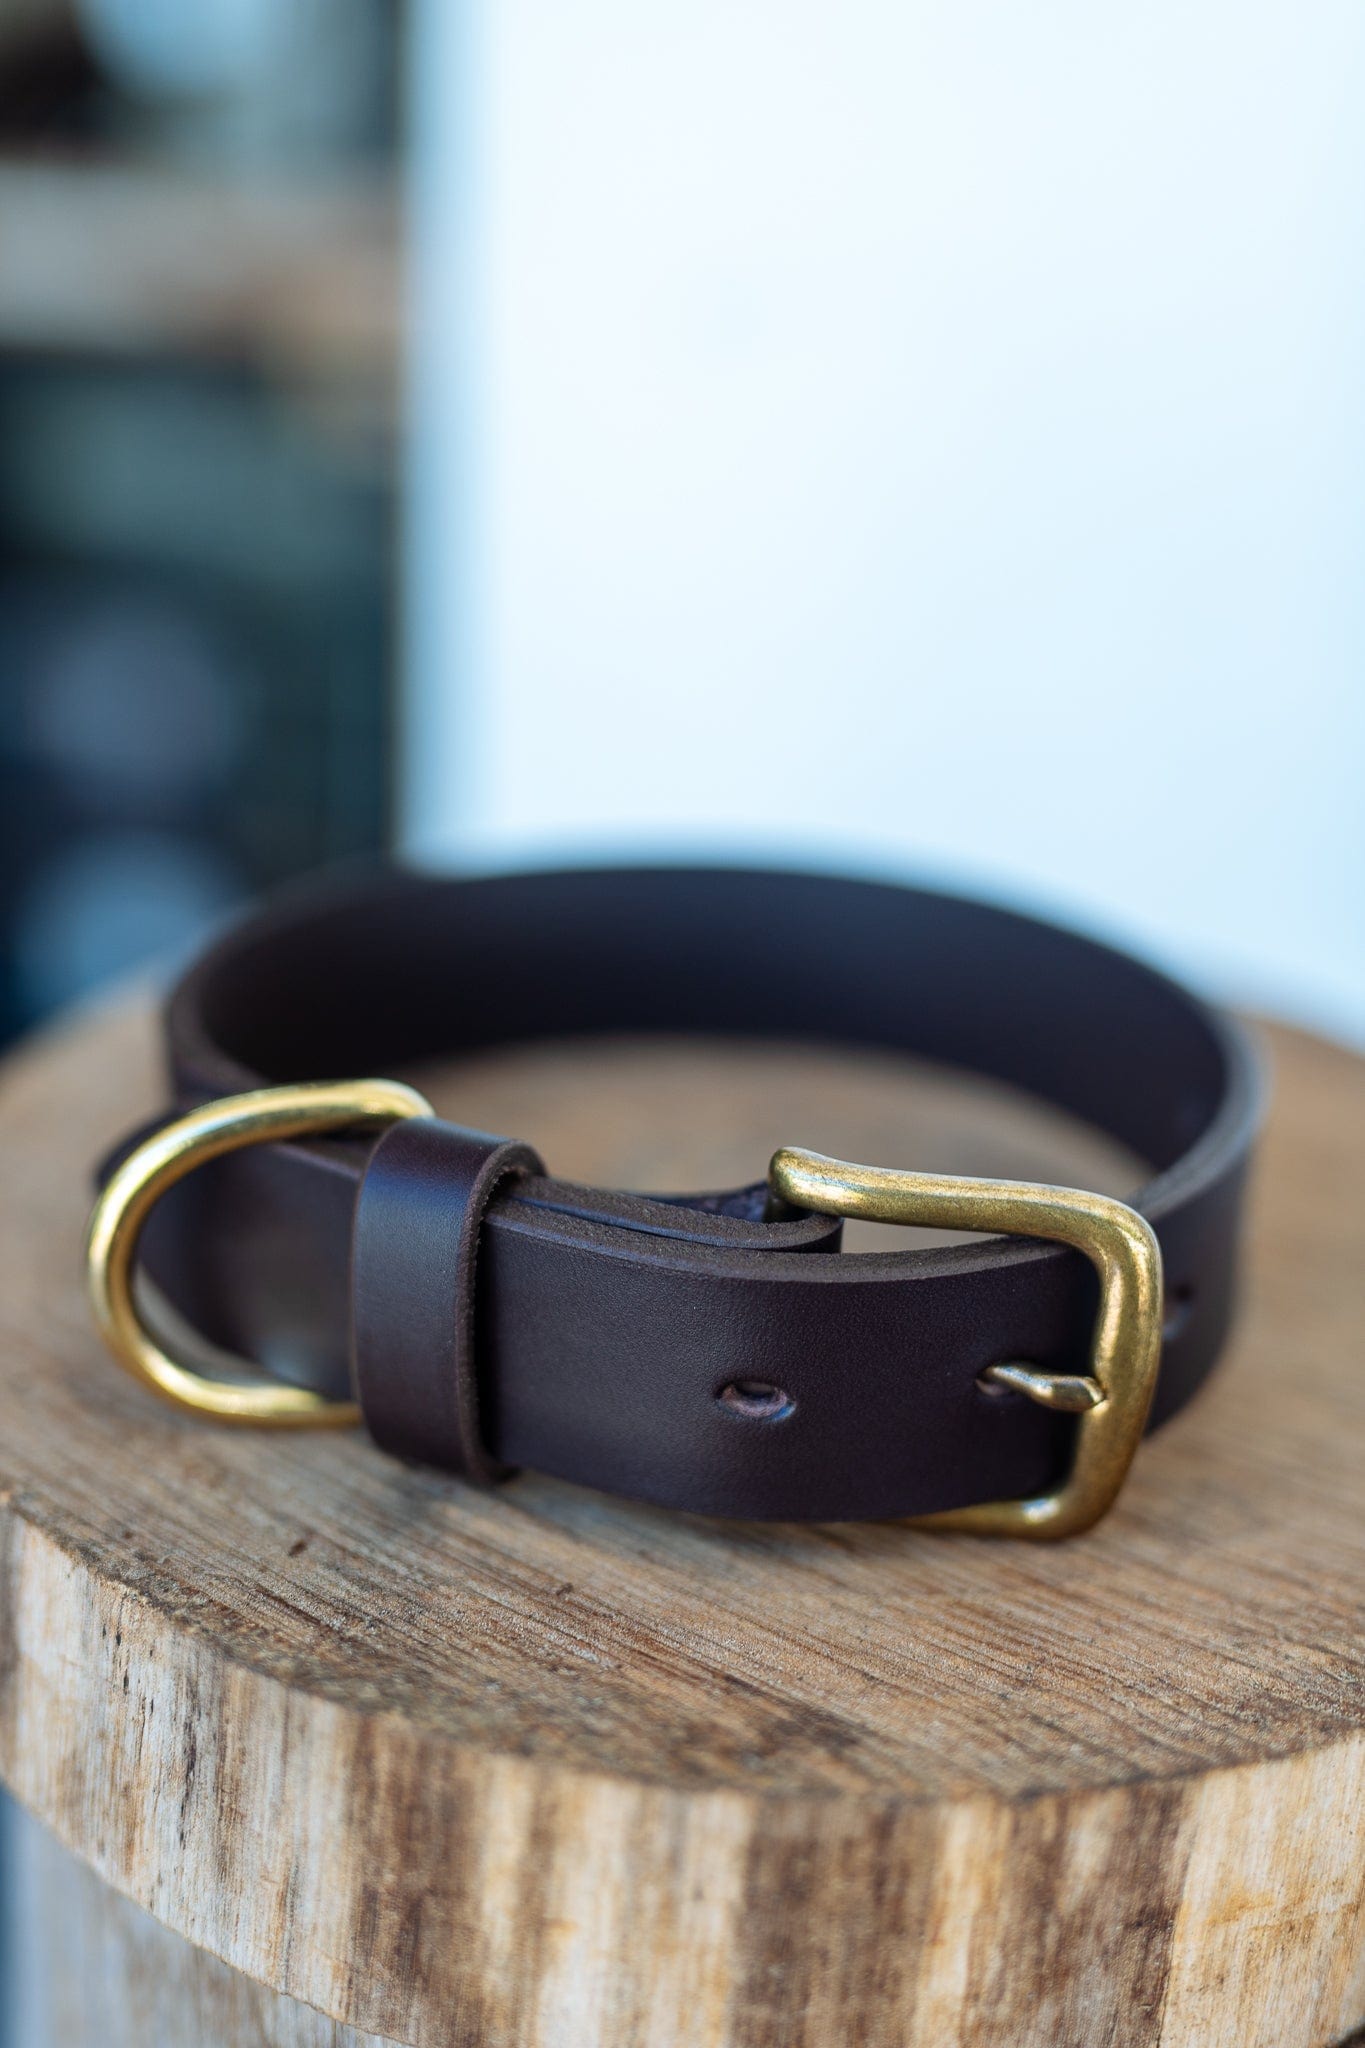 The Real McCaul Leathergoods Pet Collars & Harnesses X Small (20-29cm) / Antique Brass Classic Dog Collar - 32mm - Dark Brown Australian Made Australian Owned Leather Dog Collar with Brass Fittings- Australian Made